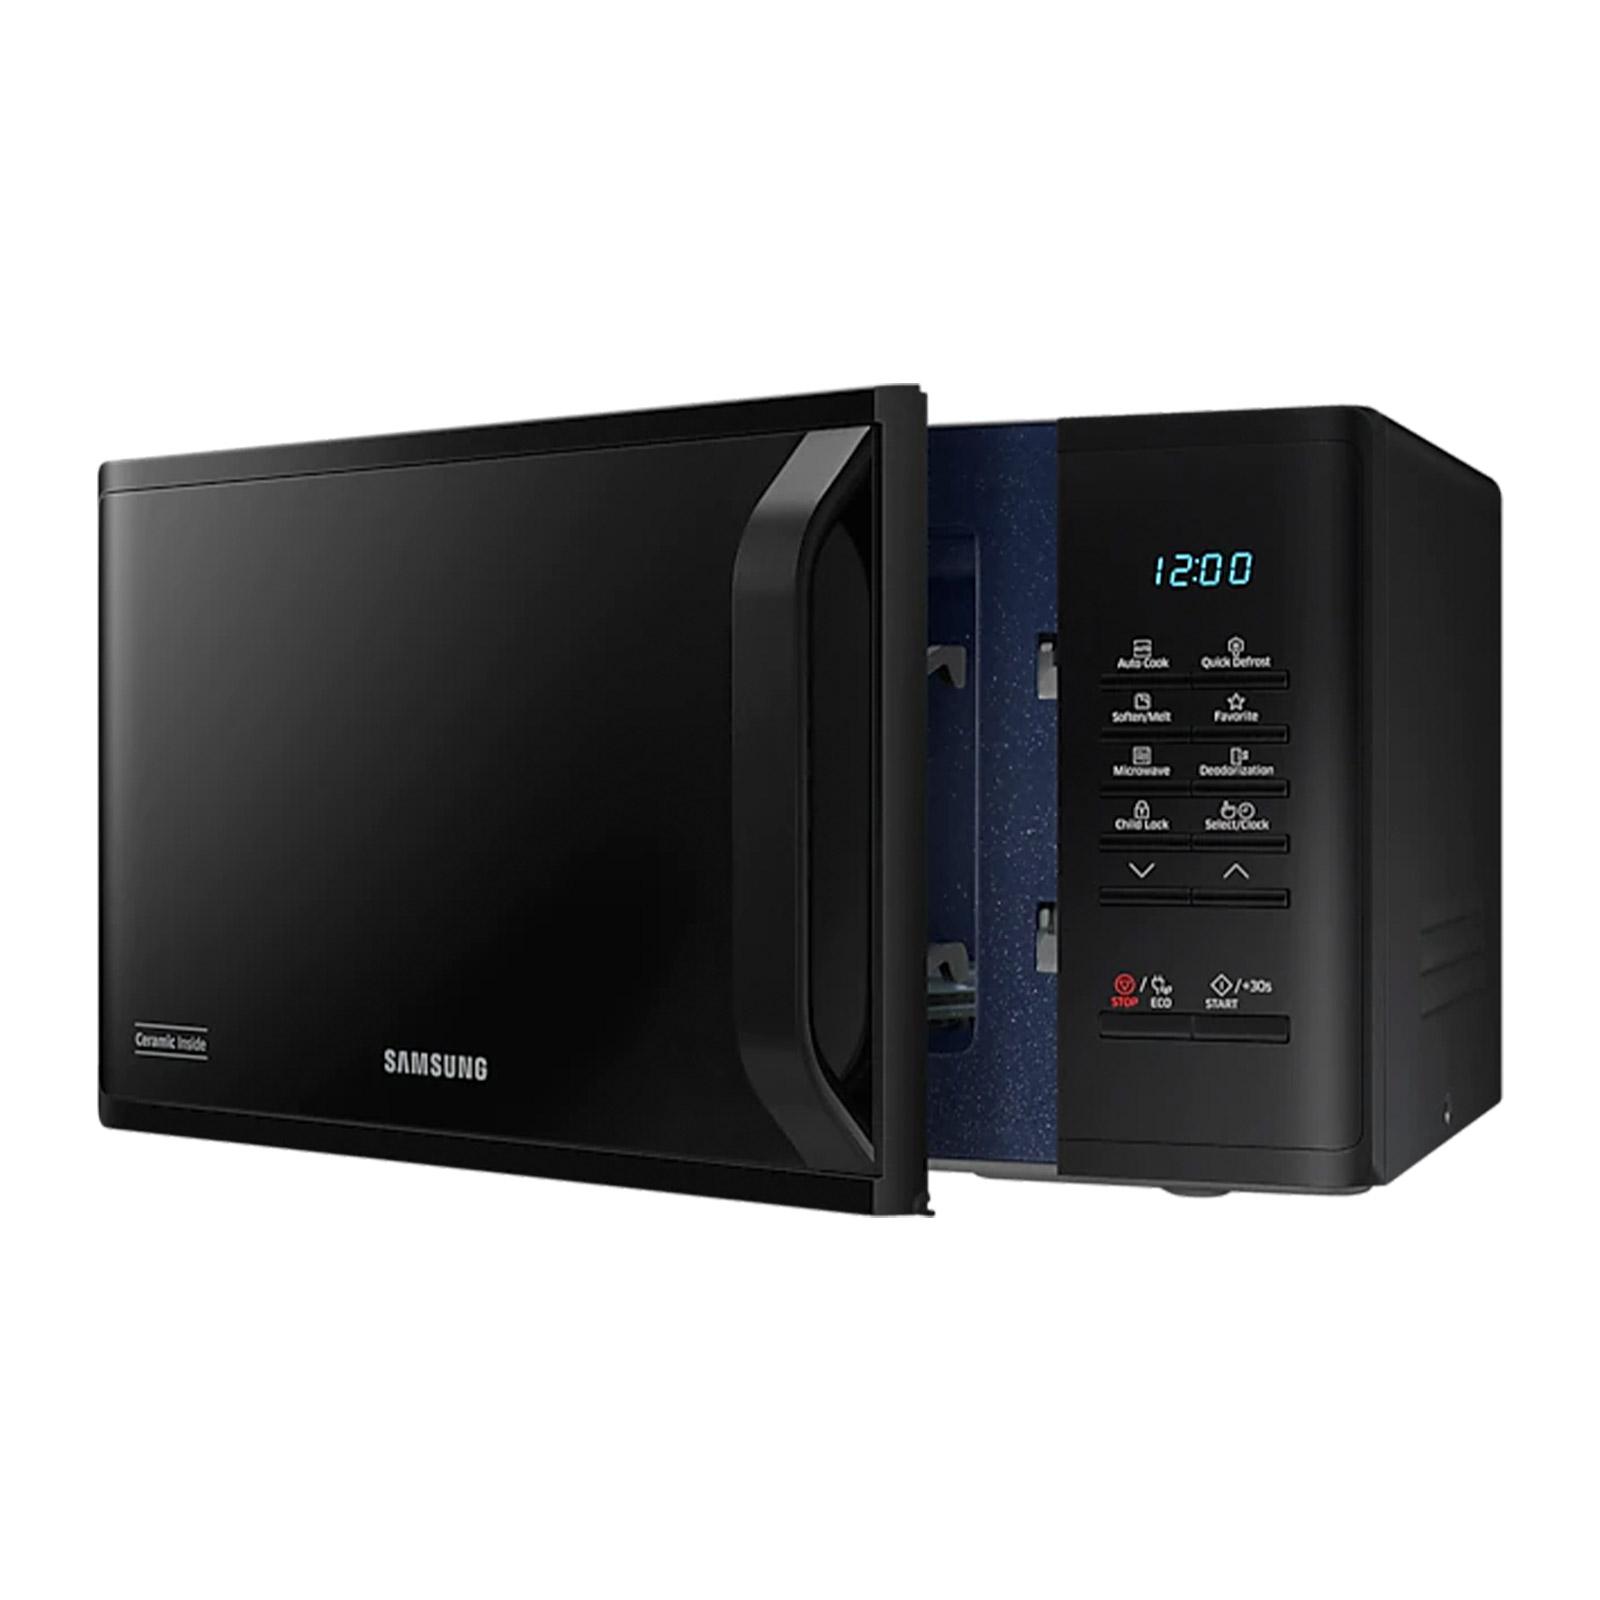 Ulempe direktør Maestro Buy Samsung 23L solo microwave online at best price | Best Online Shopping  in India | Shop Mobiles, Laptops, Home Appliances & more at Best Offers &  Deals!